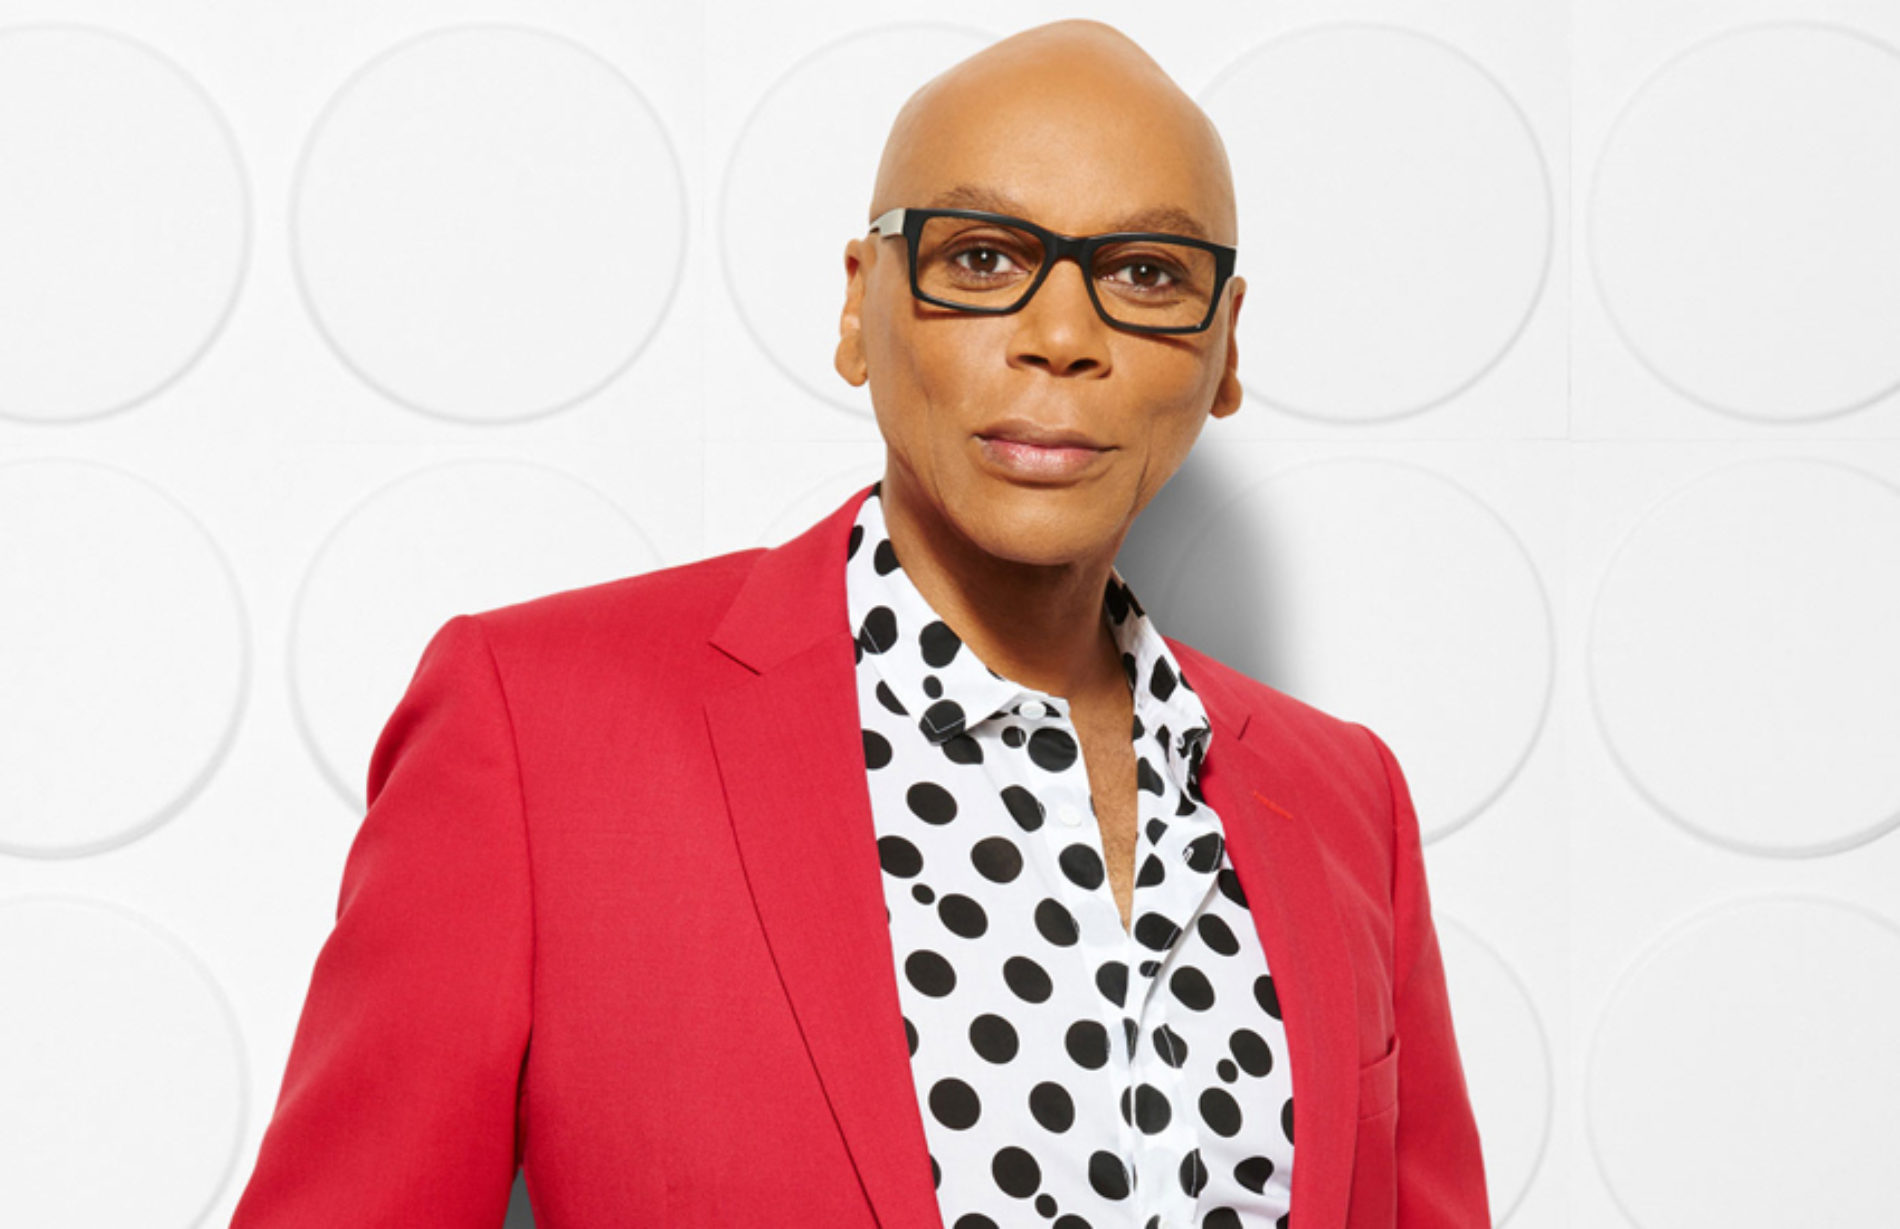 Hulu will develop TV show based on RuPaul’s life, and it’s called ‘Queen’